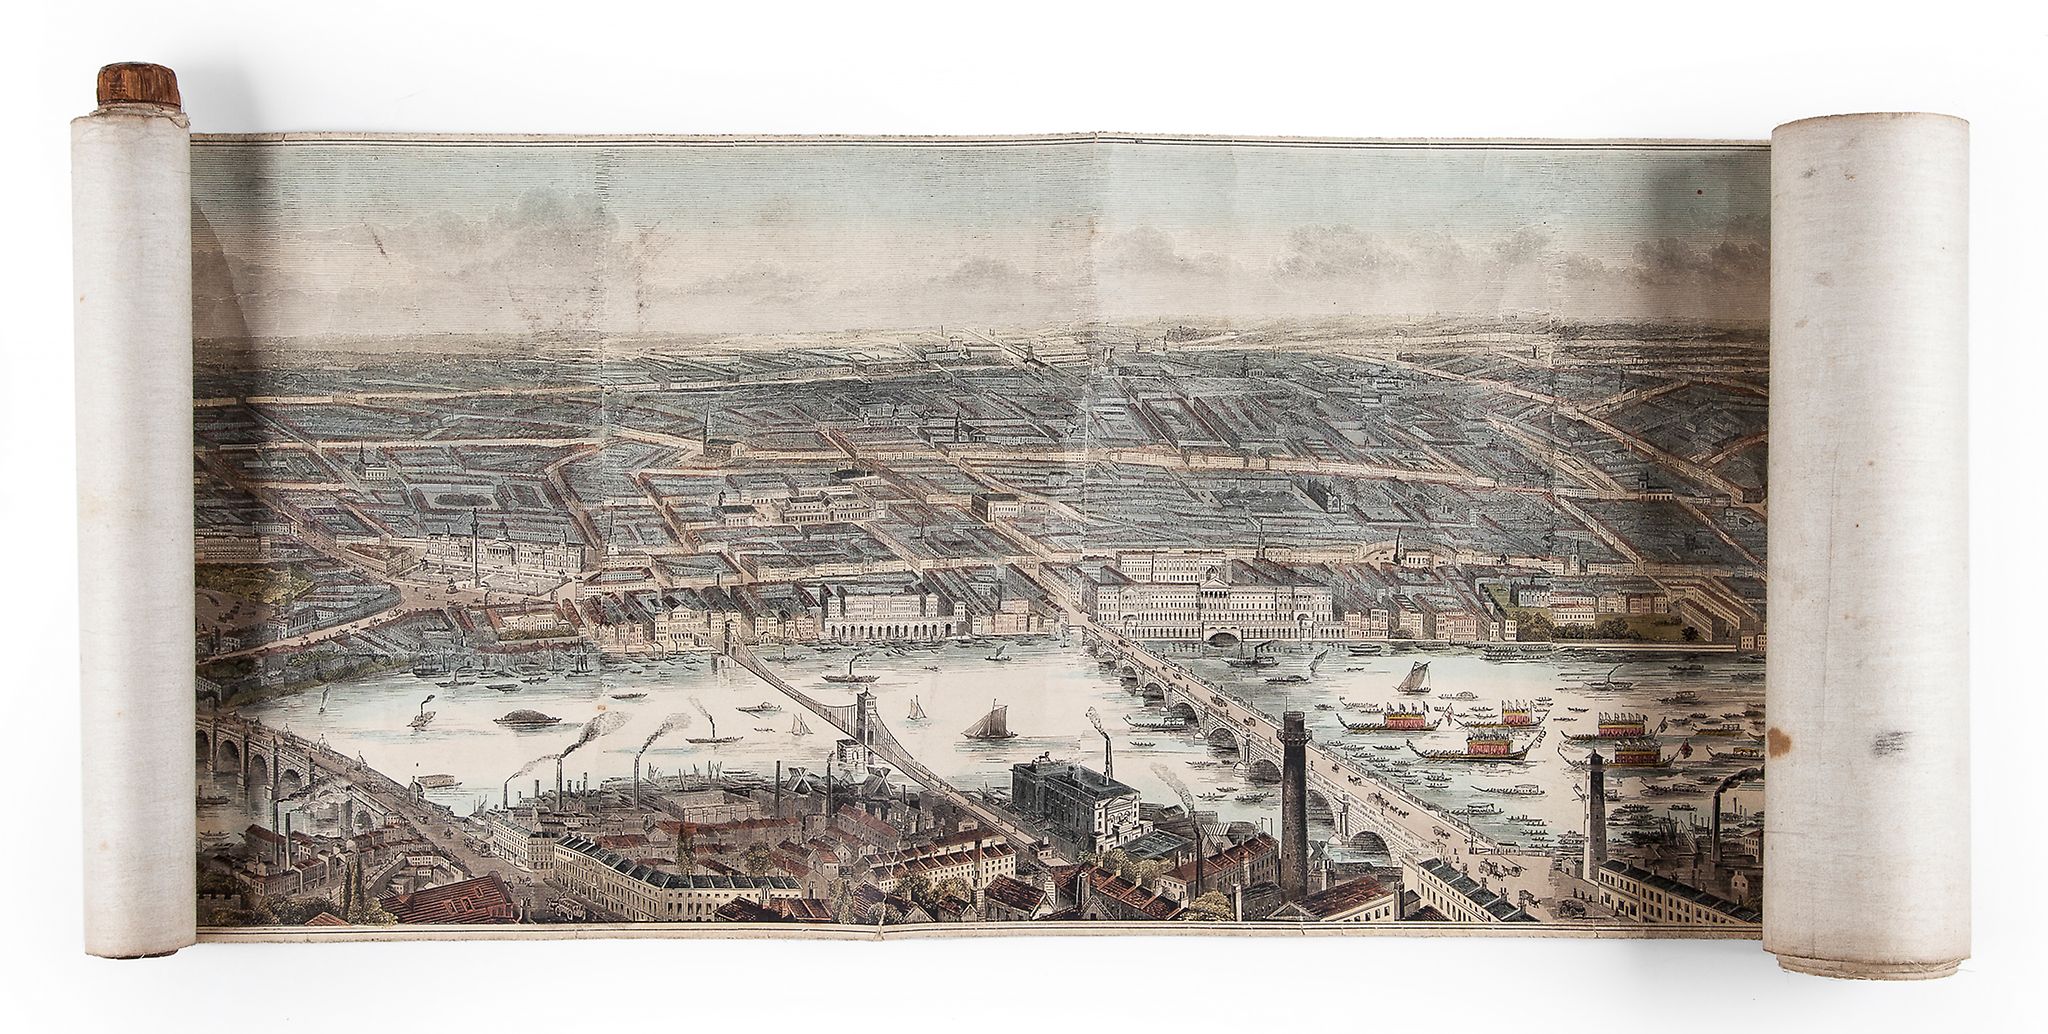 Illustrated London News (The). - Panorama of London and the River Thames,  from Millbank to